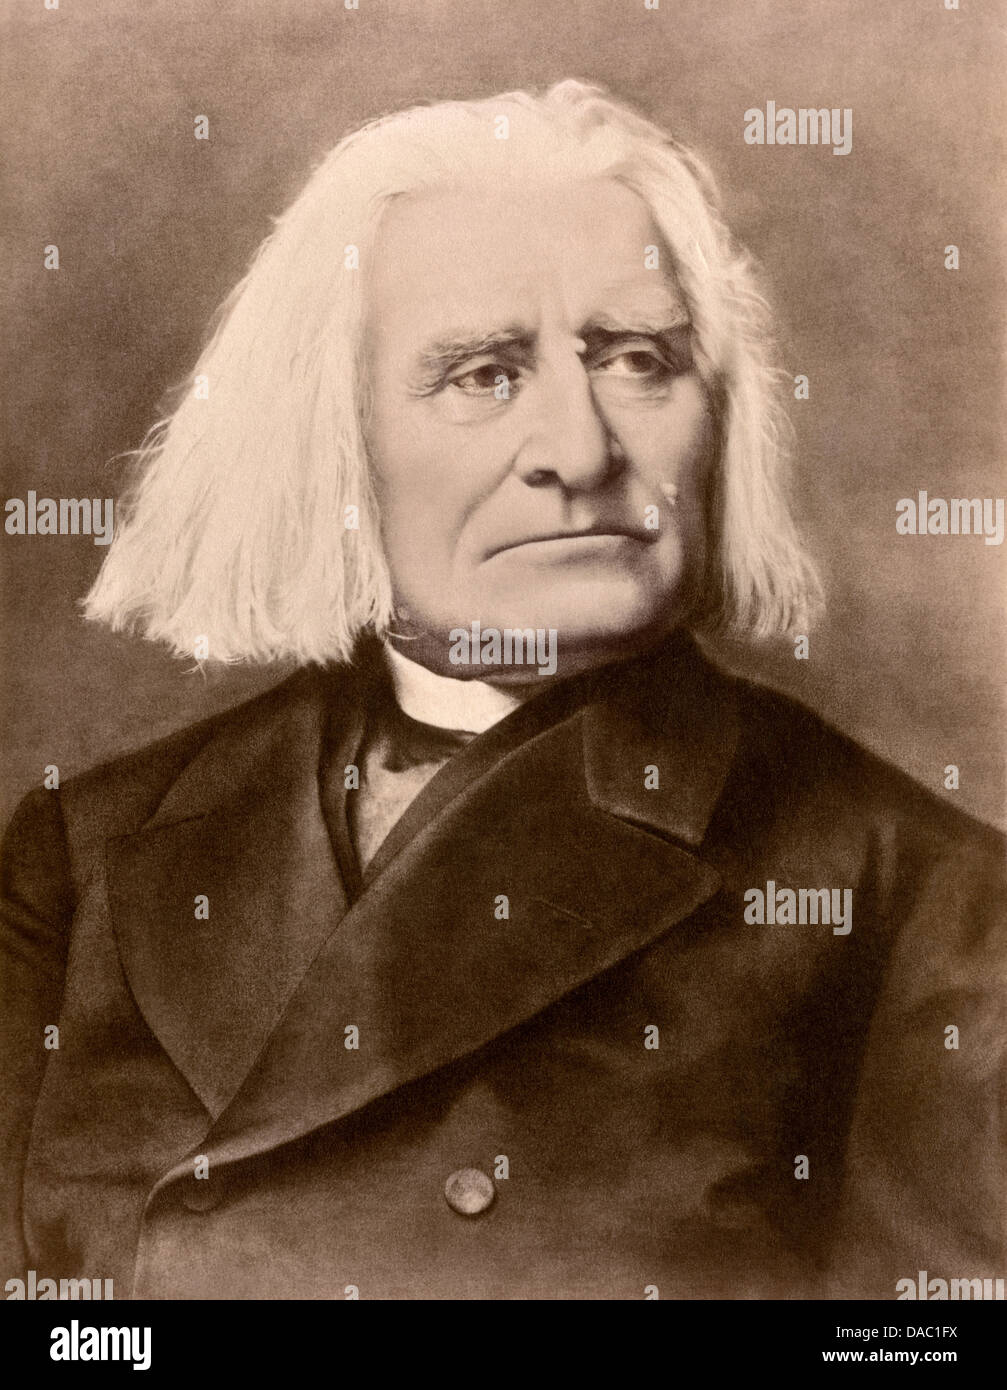 Hungarian composer and conductor Franz Liszt. Photograph Stock Photo